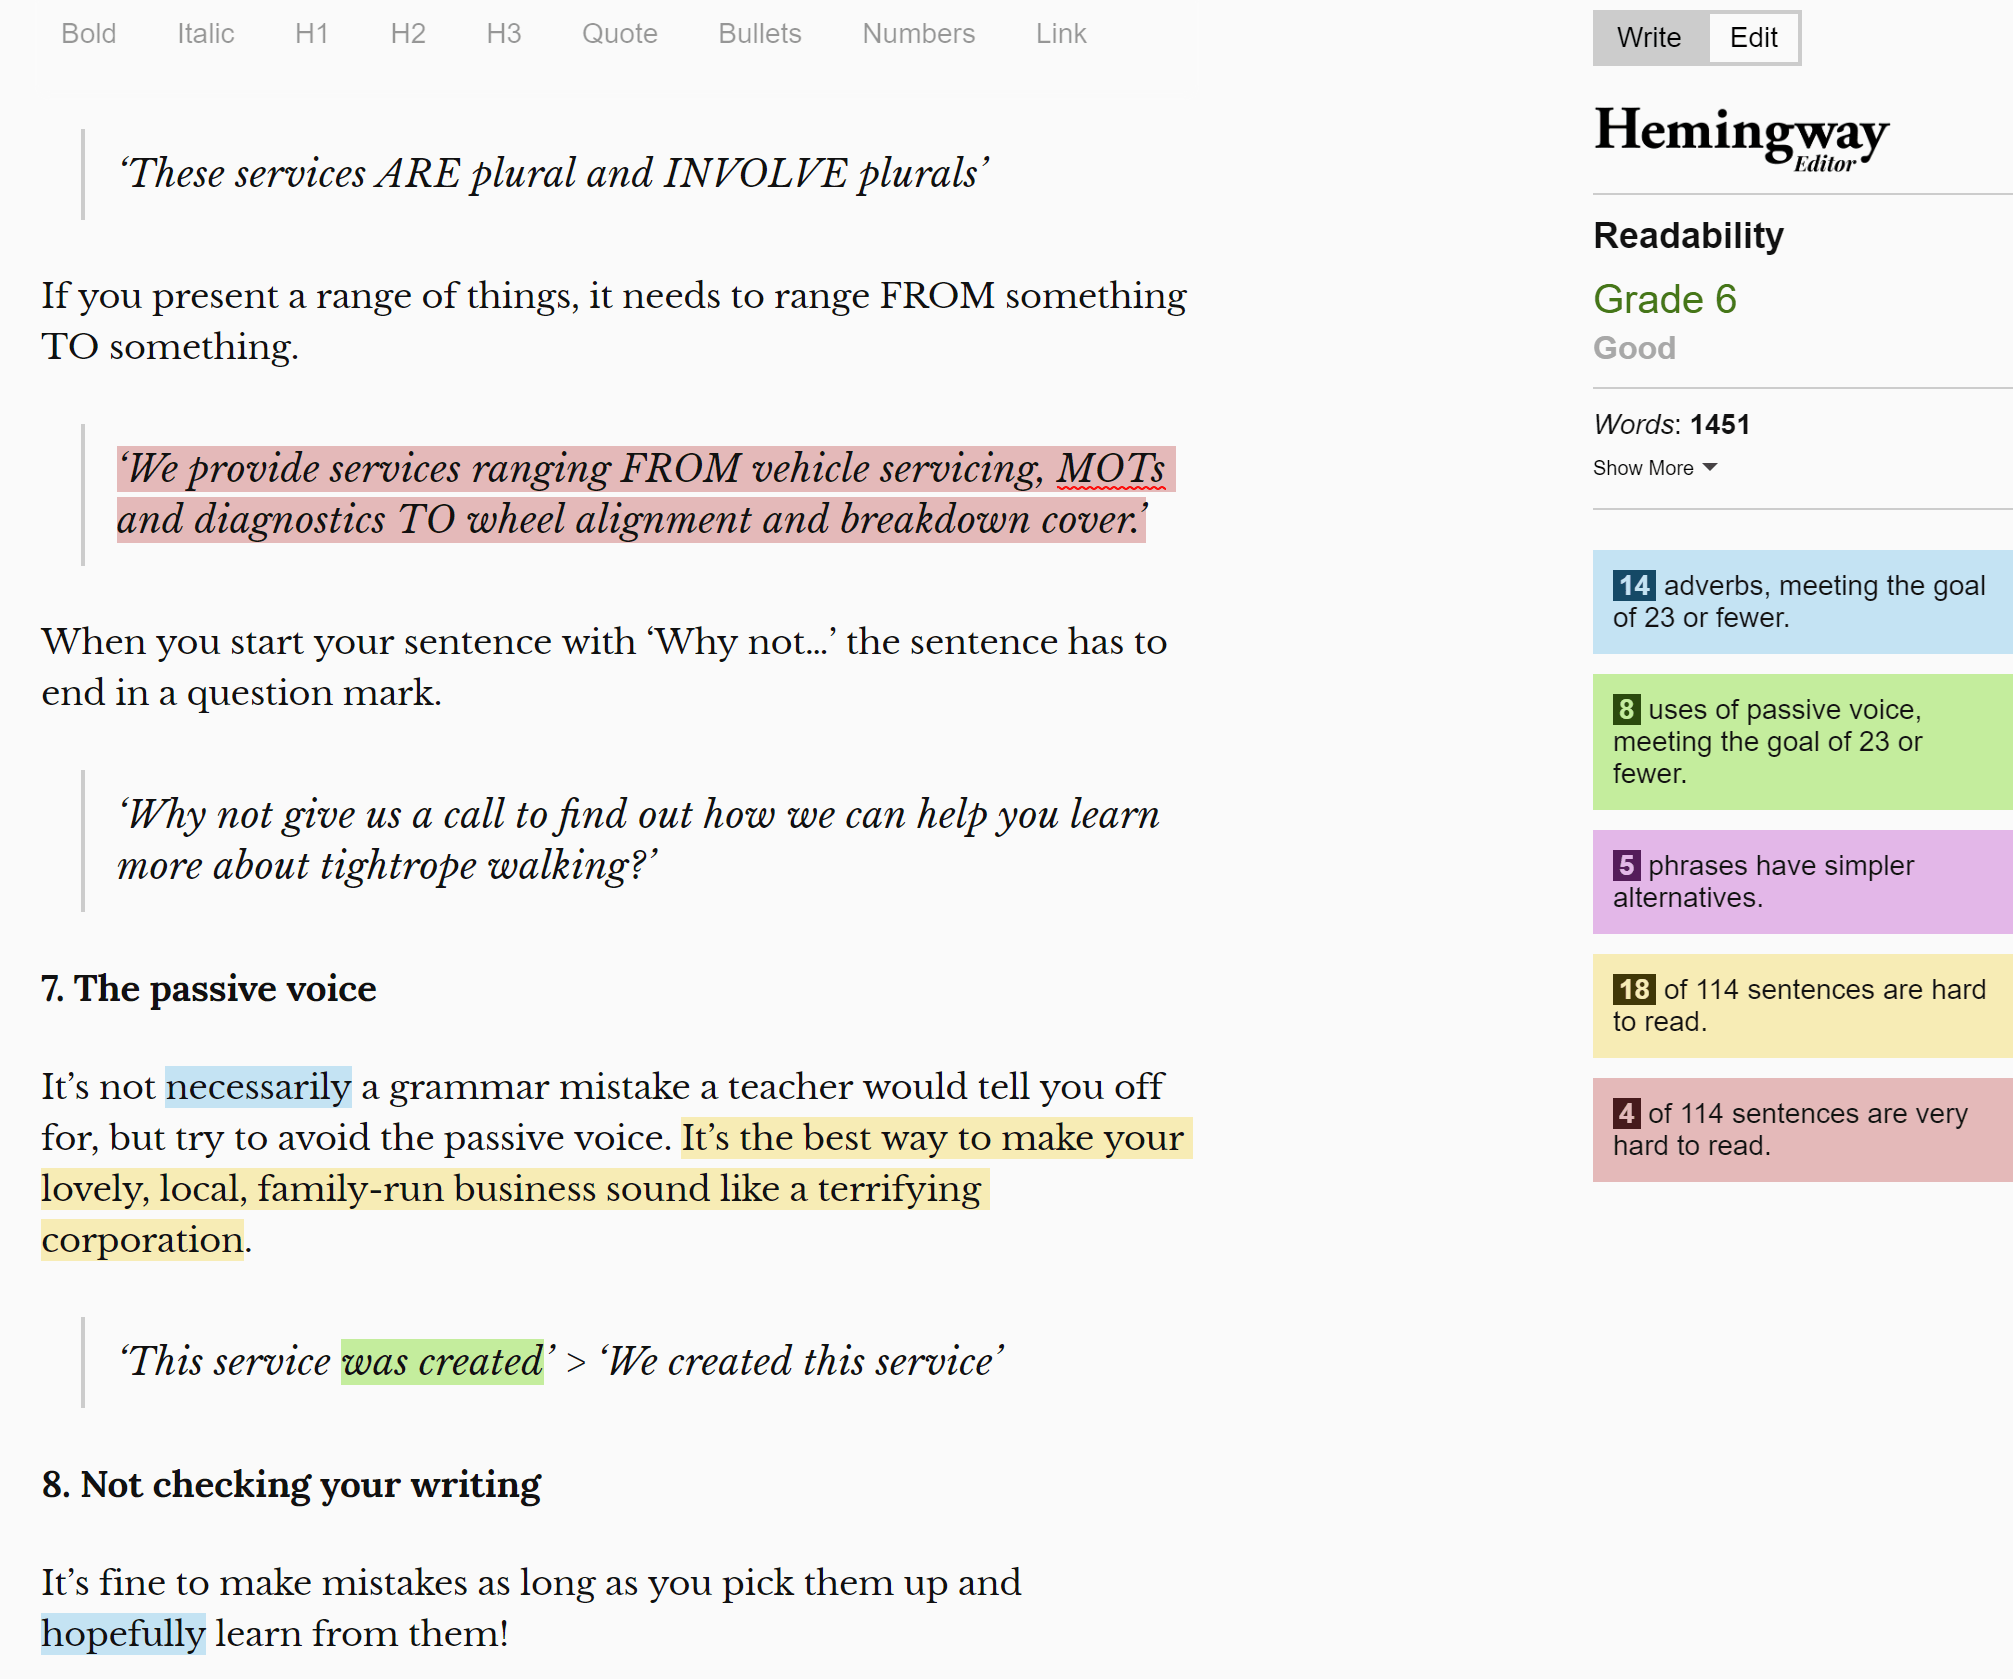 Hemingway app website showing writing that has been analysed for readability